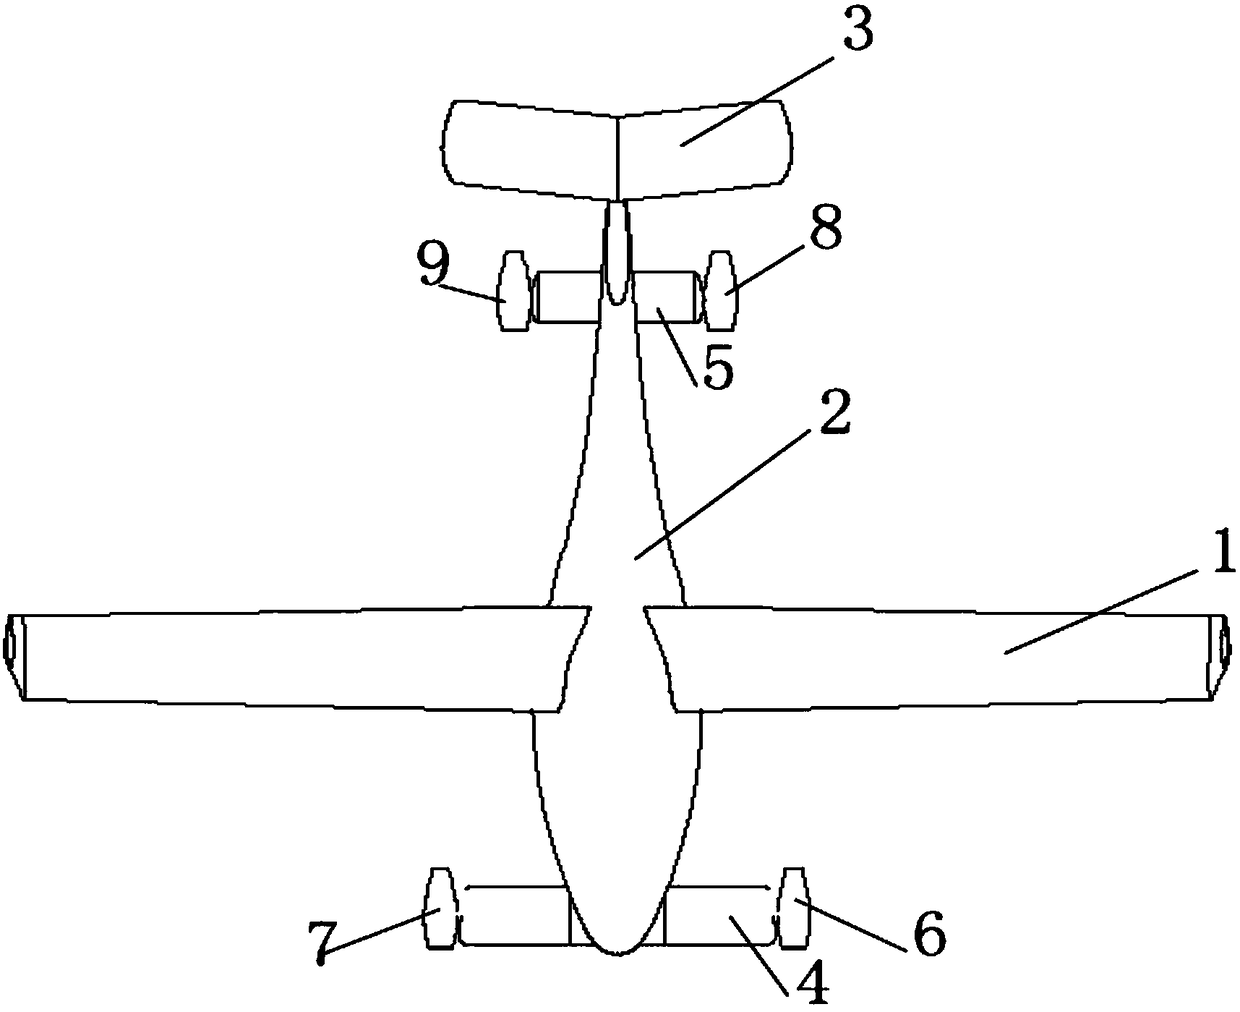 Three-airfoil layout vertical take-off and landing general aircraft